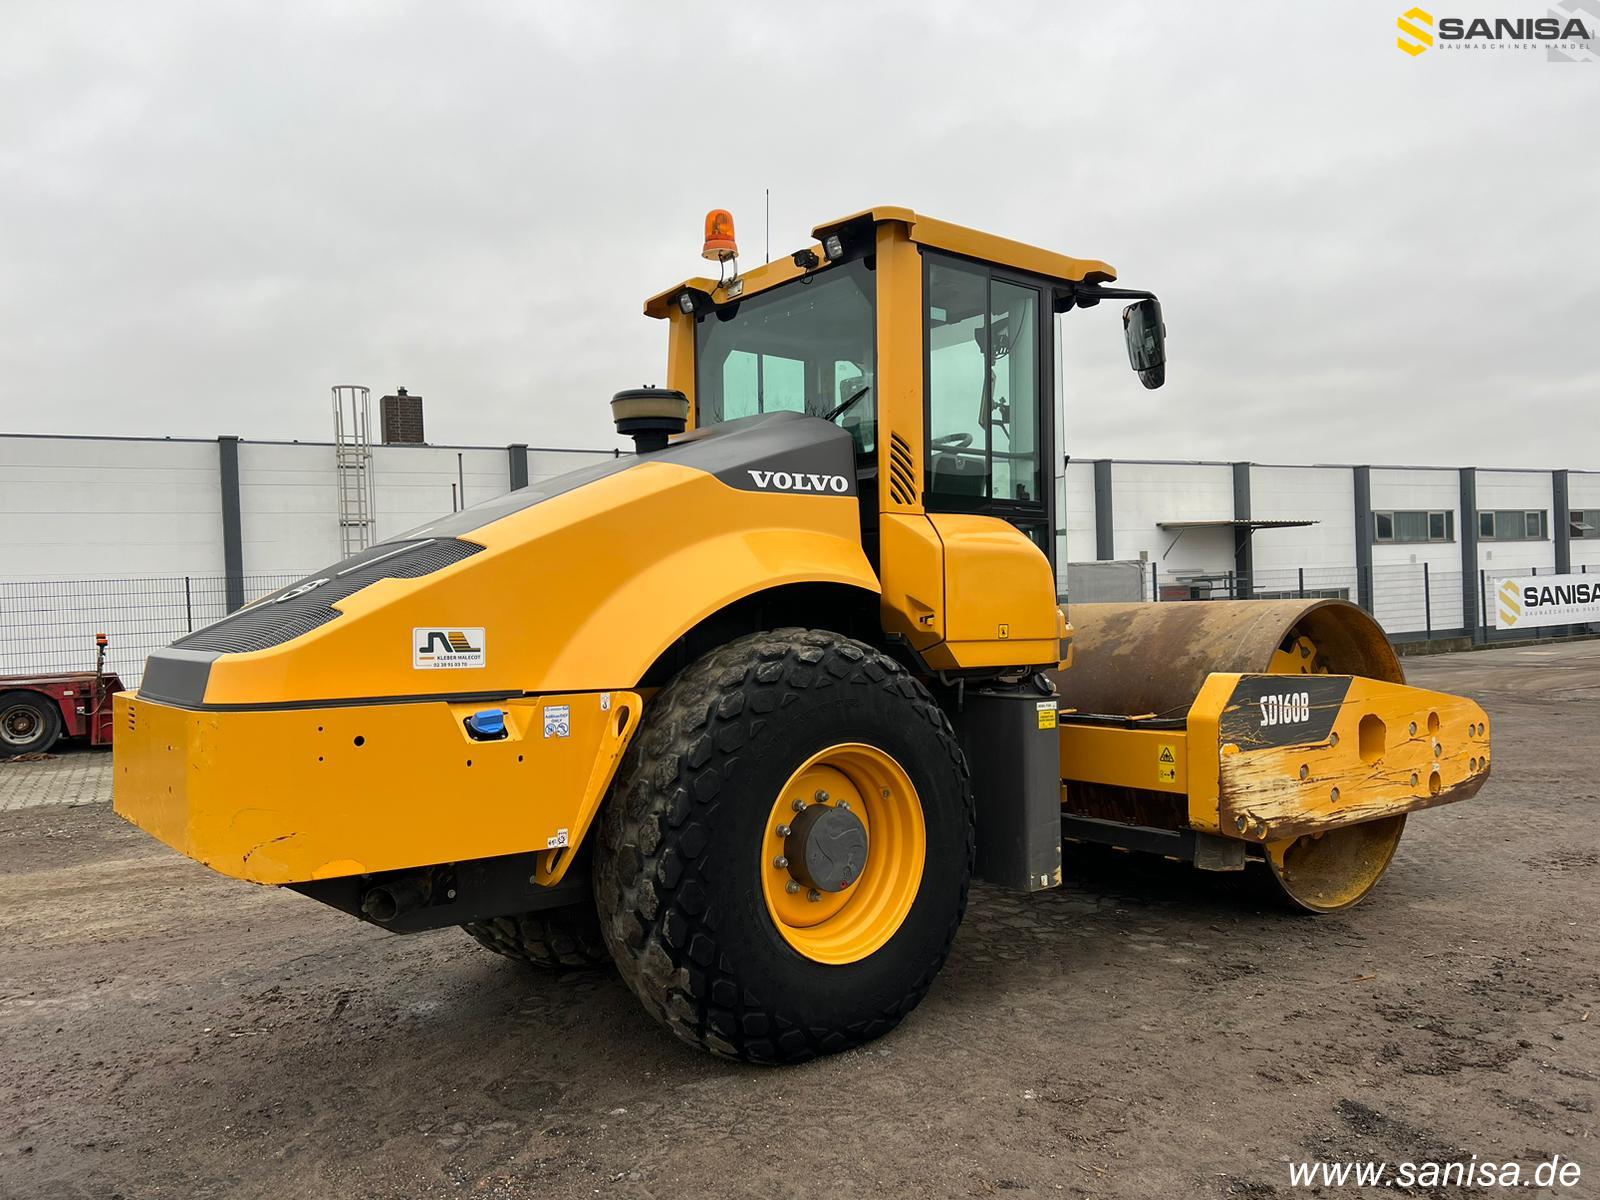 VOLVO SD160B road roller (combined)